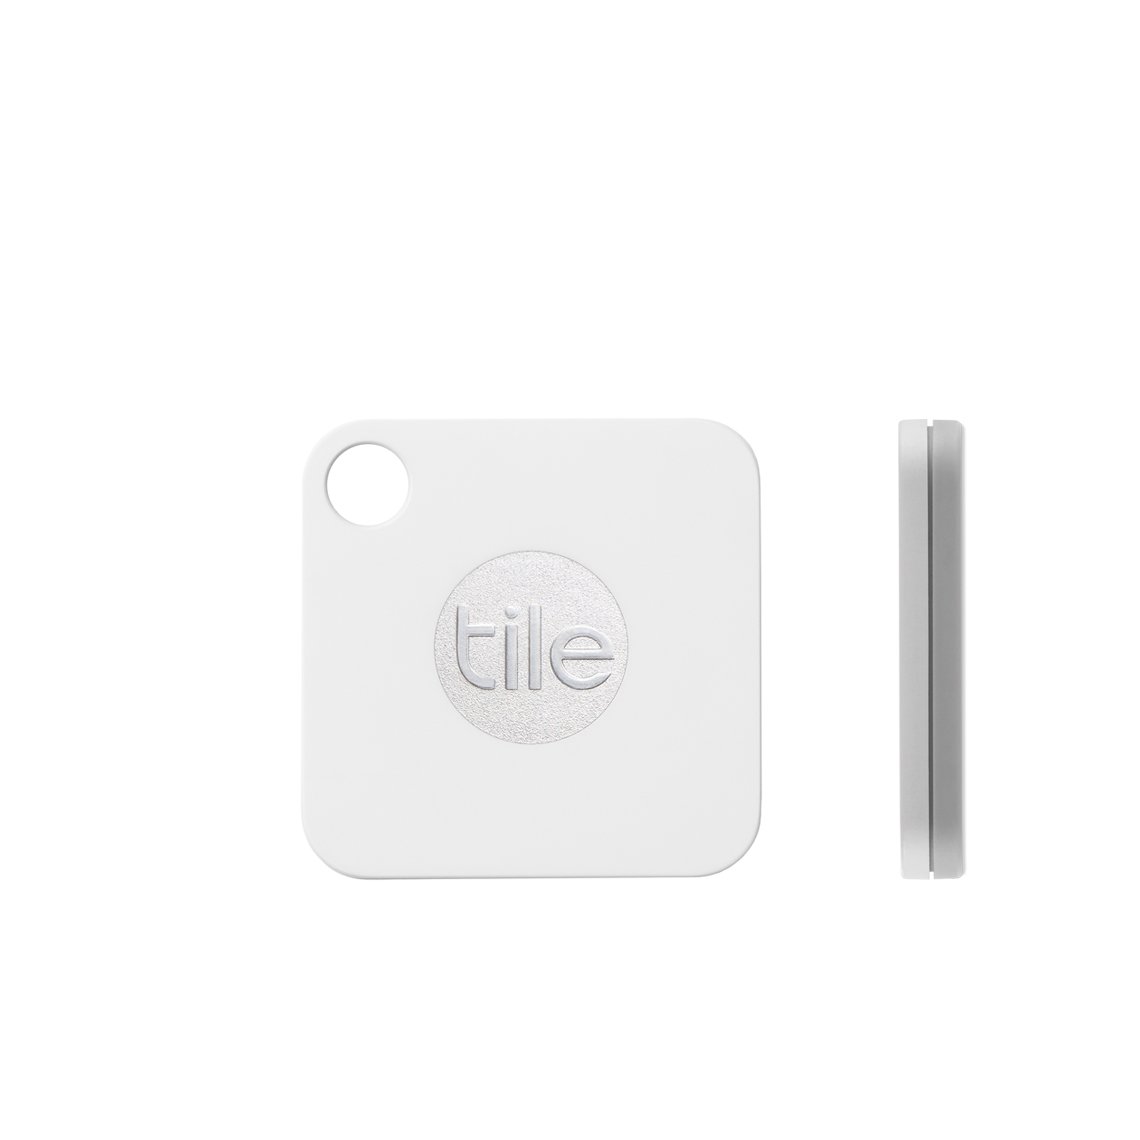 Tile Mate (2016) - 1 Pack - Discontinued by Manufacturer